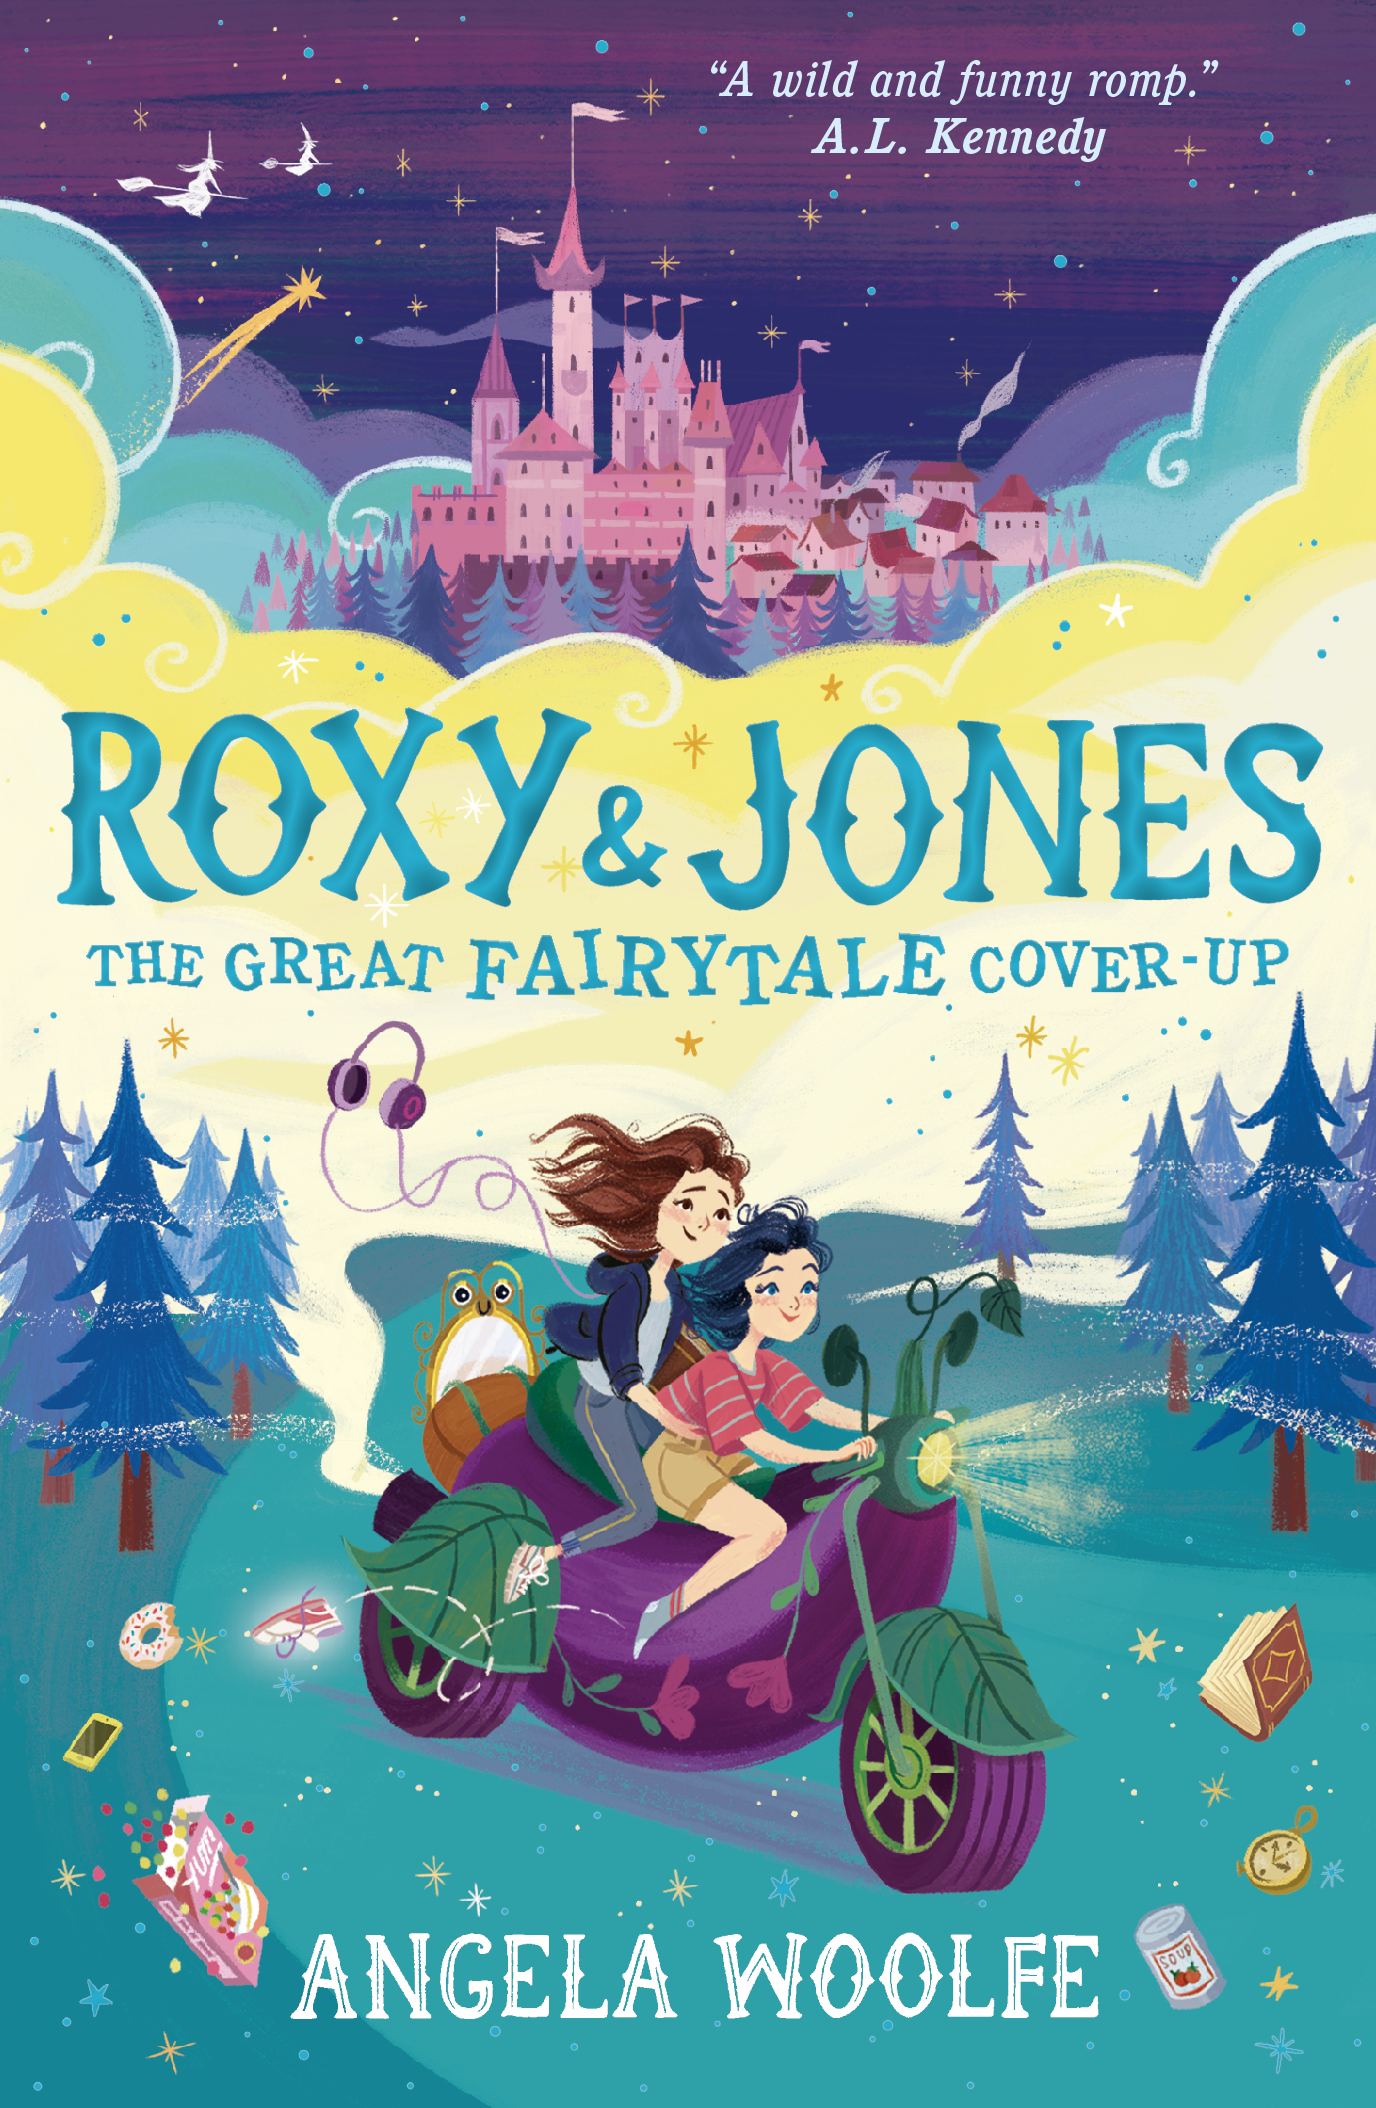 Roxy-Jones-The-Great-Fairytale-Cover-Up